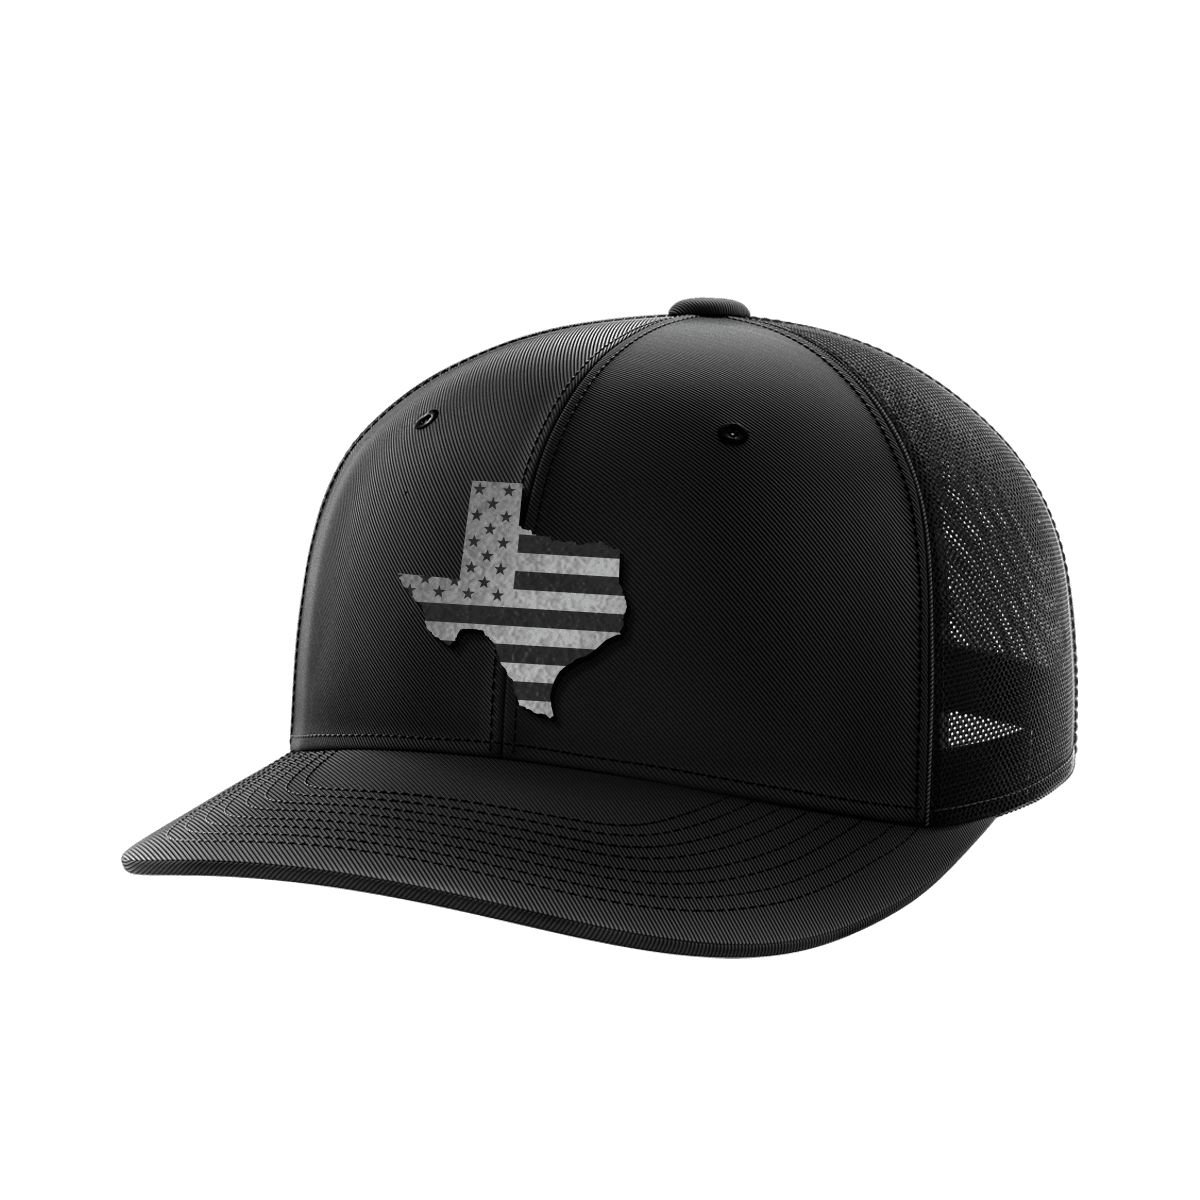 Texas United Collection (black leather) - Greater Half